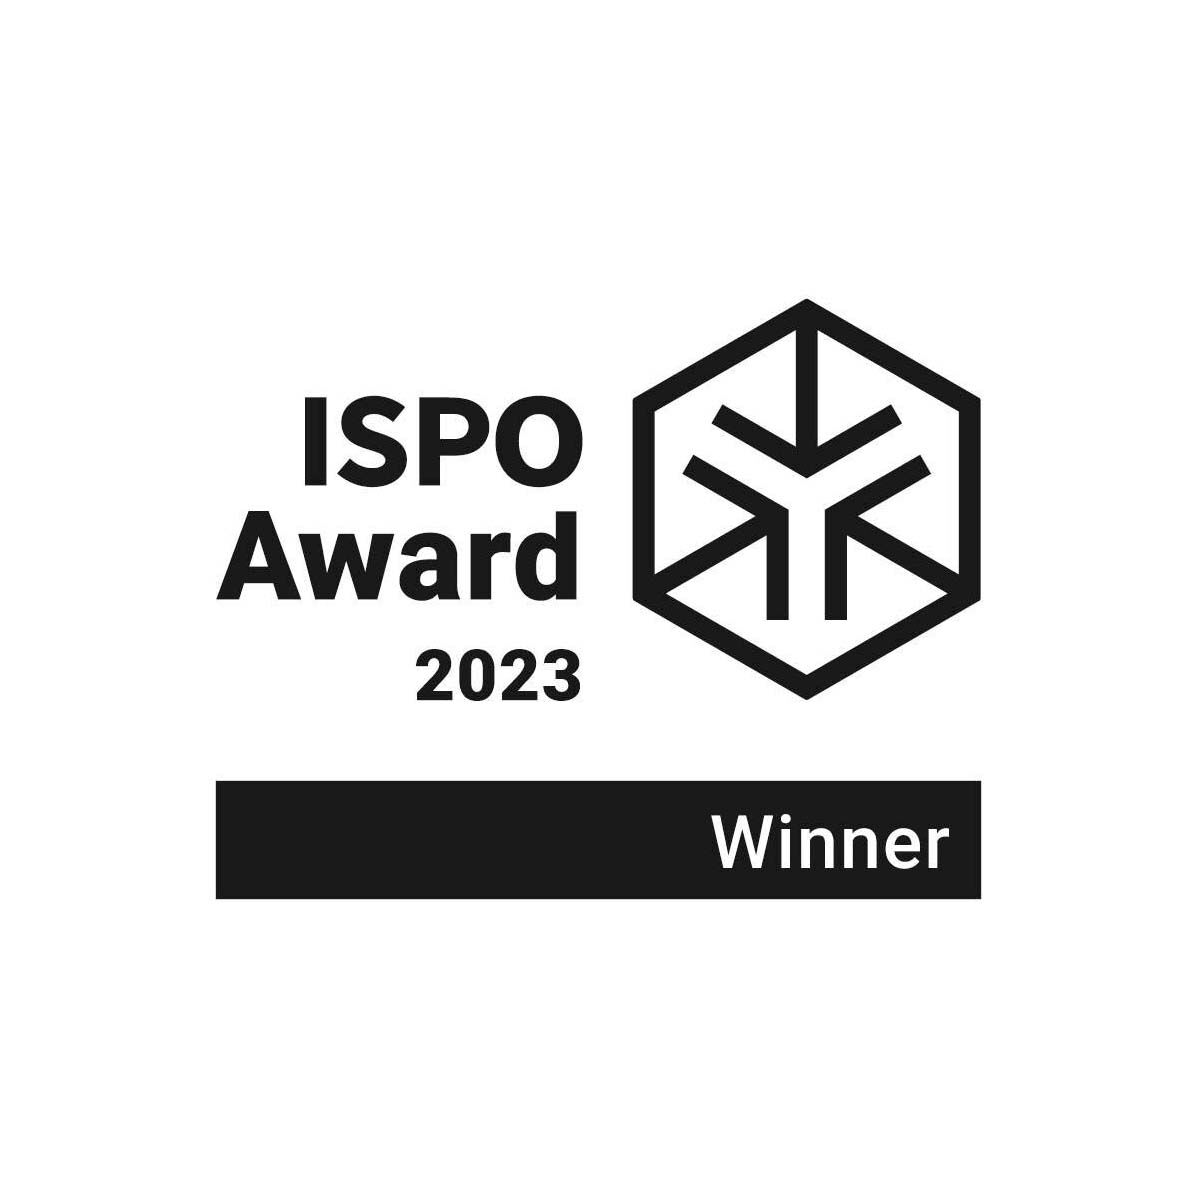 Dometic wins ISPO AWARD 2023 for Hydration Water Faucet & Water Jug